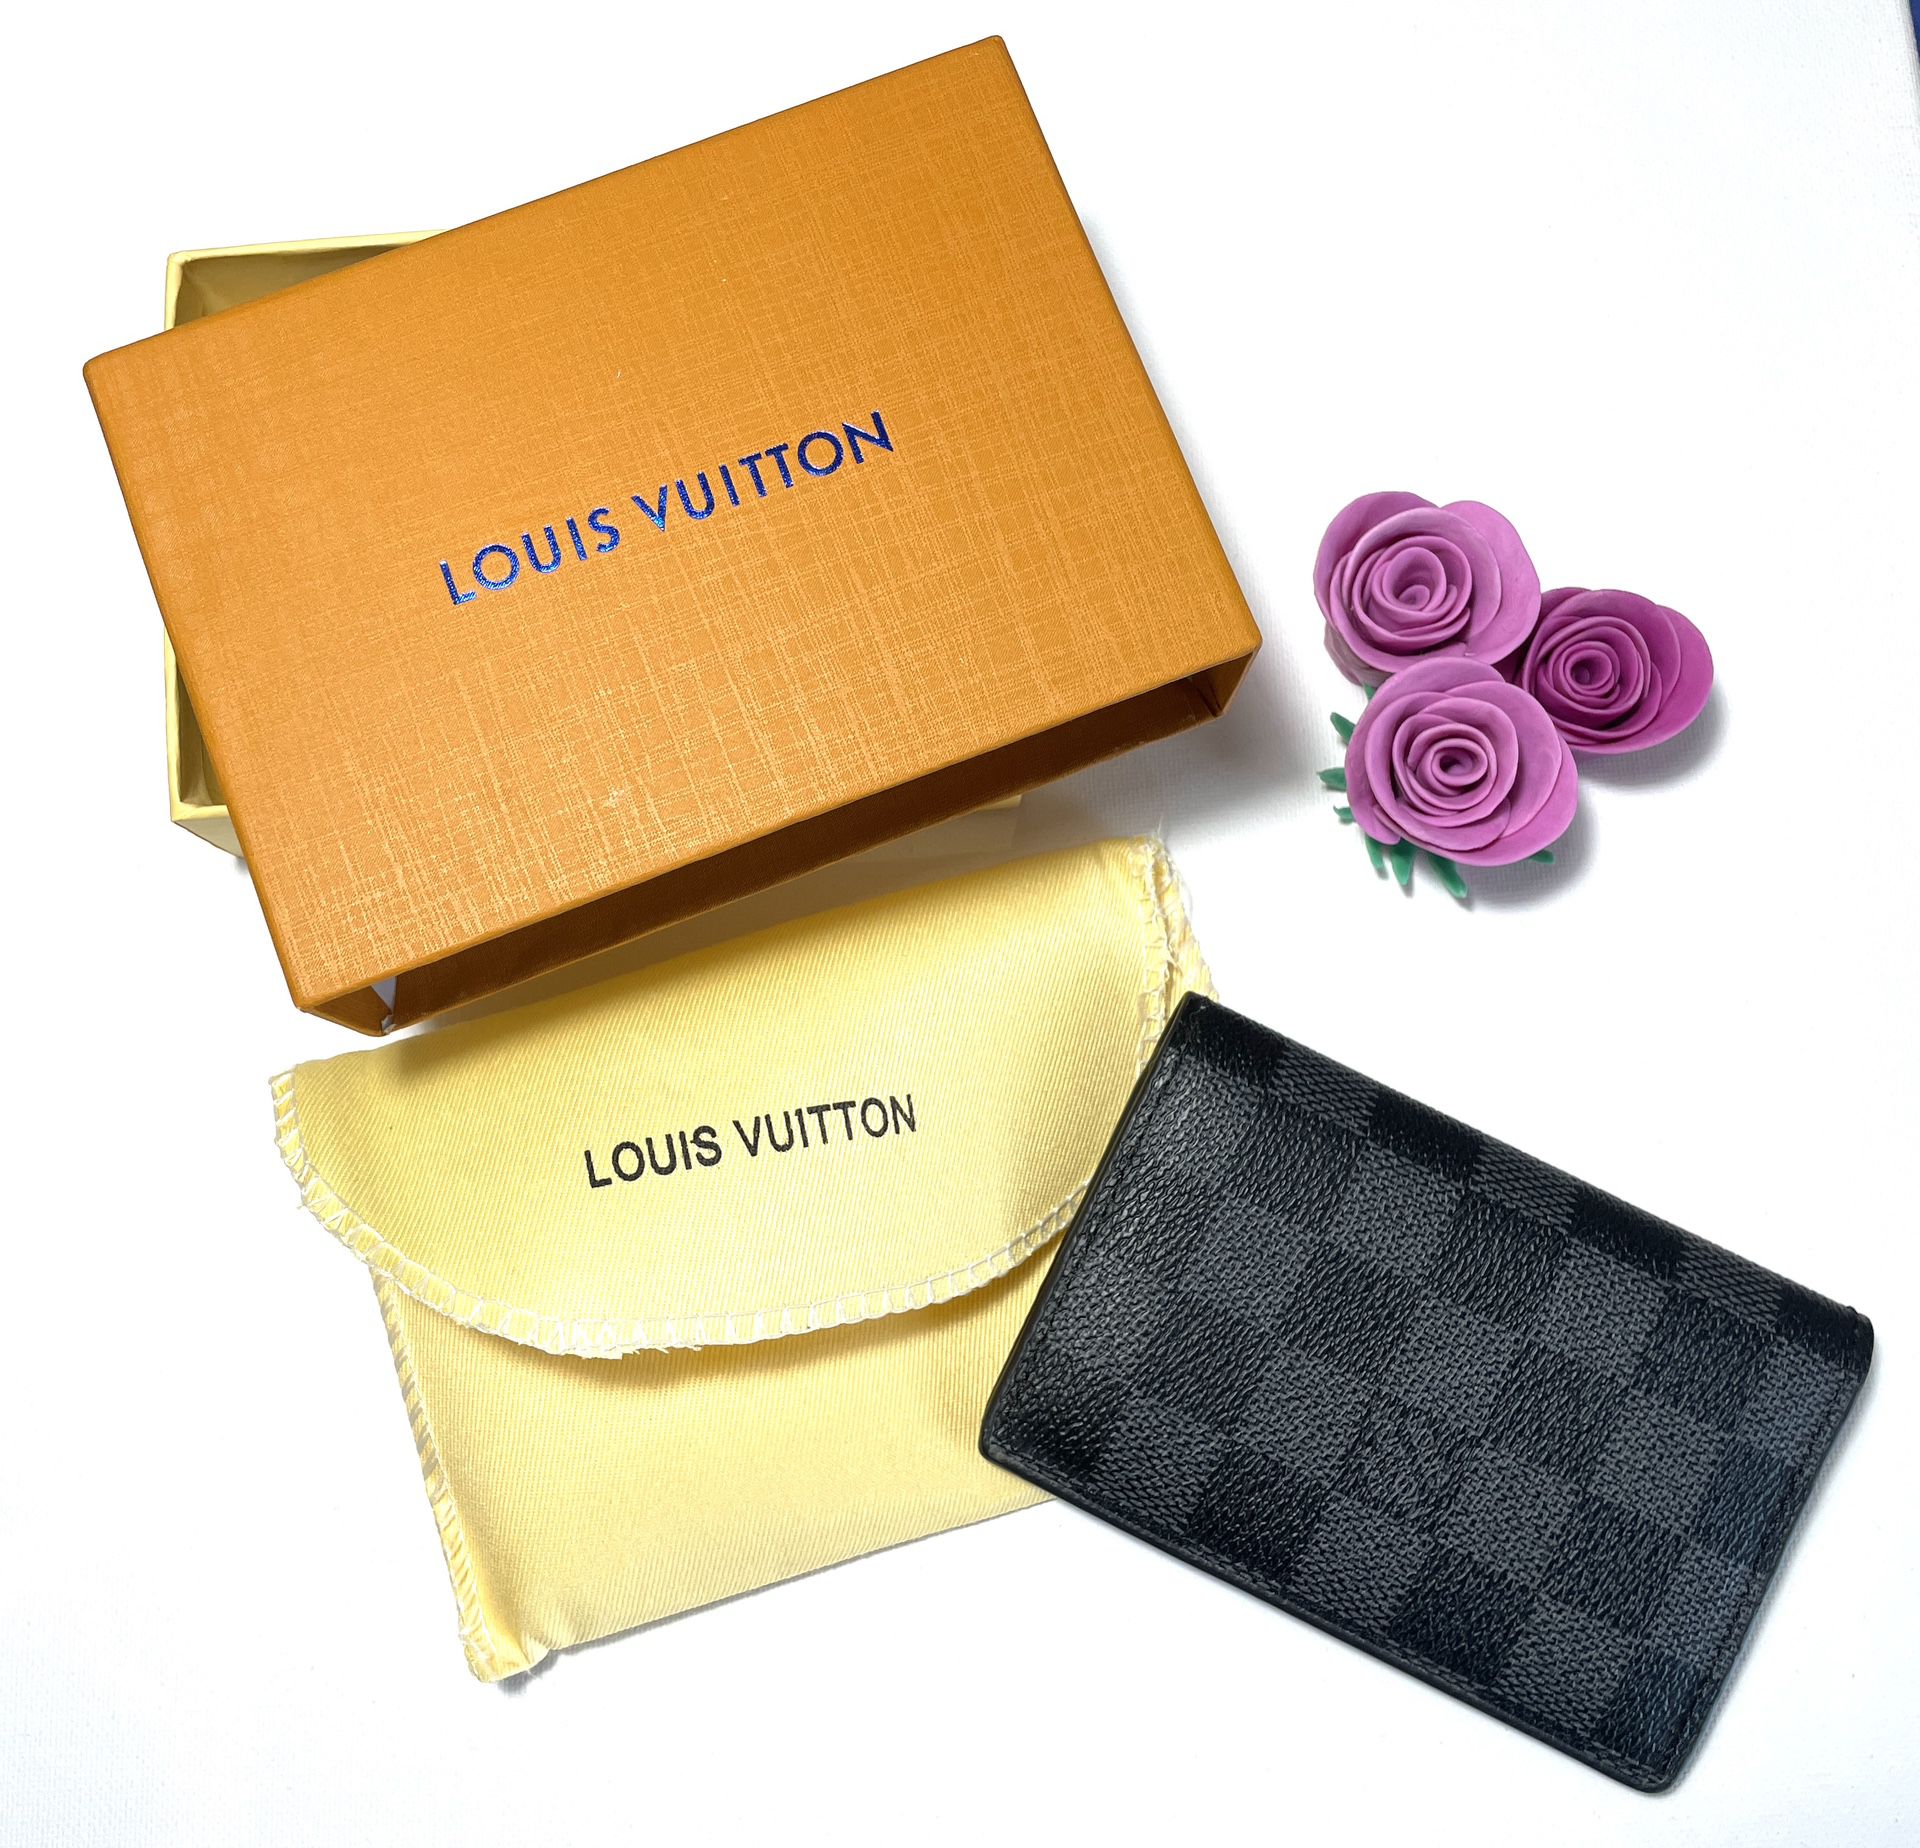 Luxurious Louis Vuitton Wallet. Gift For Him